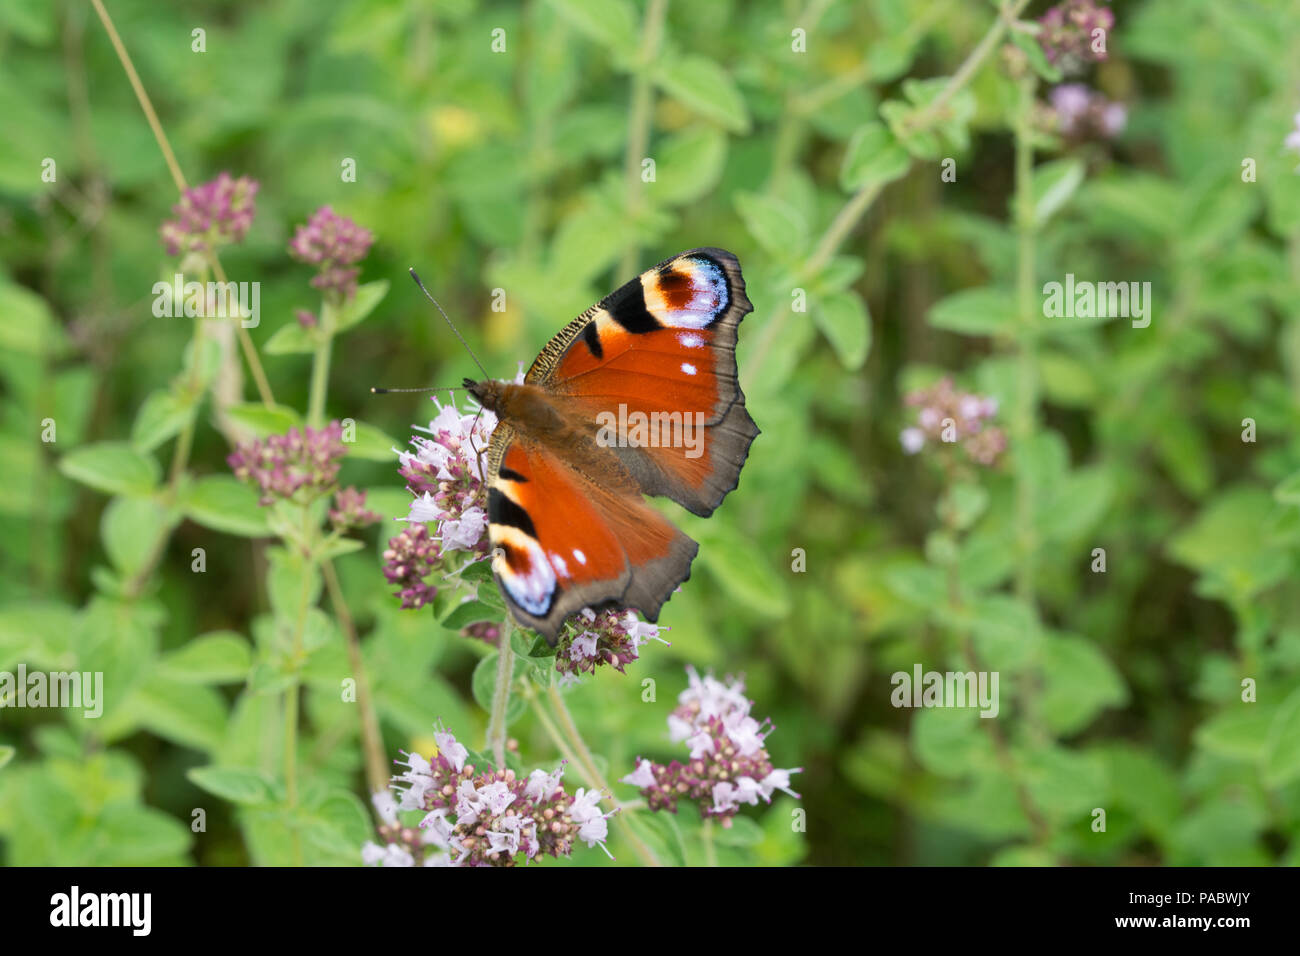 Brightly coloured peacock butterfly (Aglais io) nectaring on wild marjoram flowers, UK, during summer Stock Photo